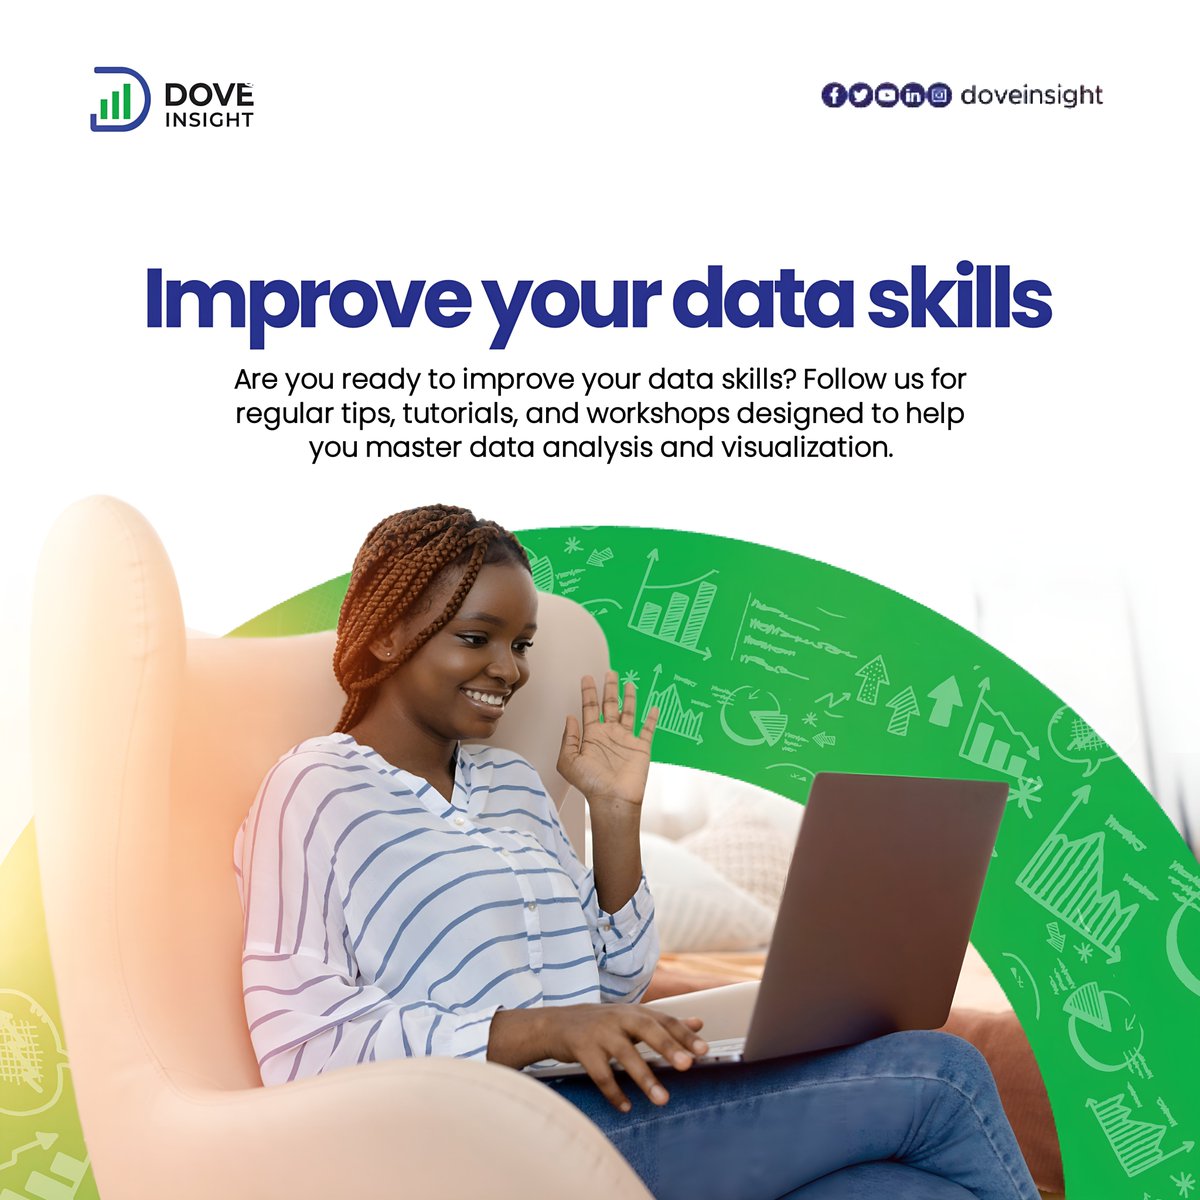 Are you ready to improve your data skills? Follow us for regular tips, tutorials, and workshops designed to help you master data analysis and visualization. #DataSkills
#DoveInsight 
#Excel 
#SQL